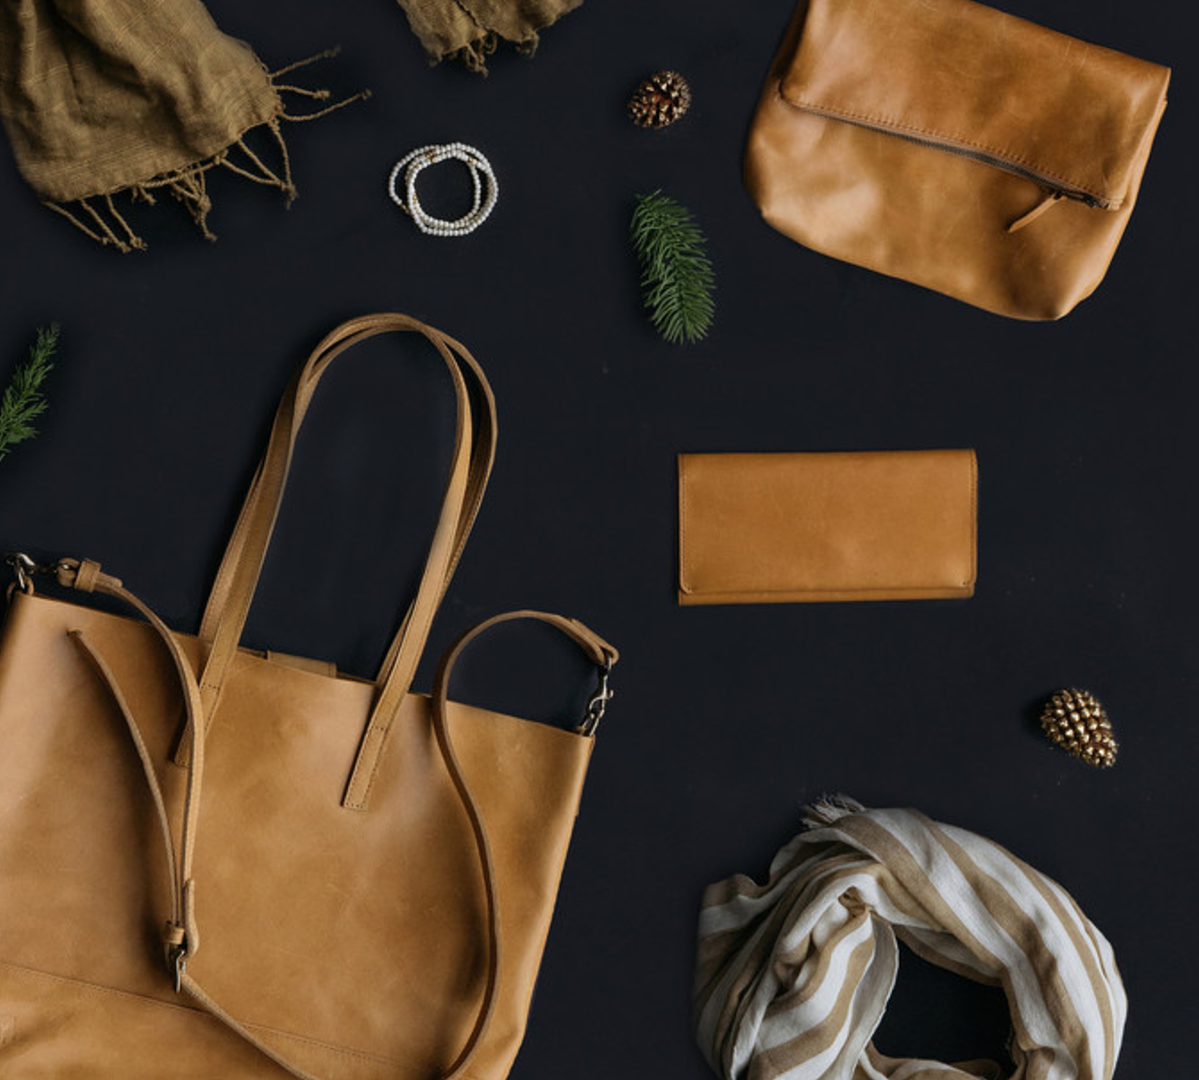 FashionABLE gorgeous handmade accessories that give back to women in need